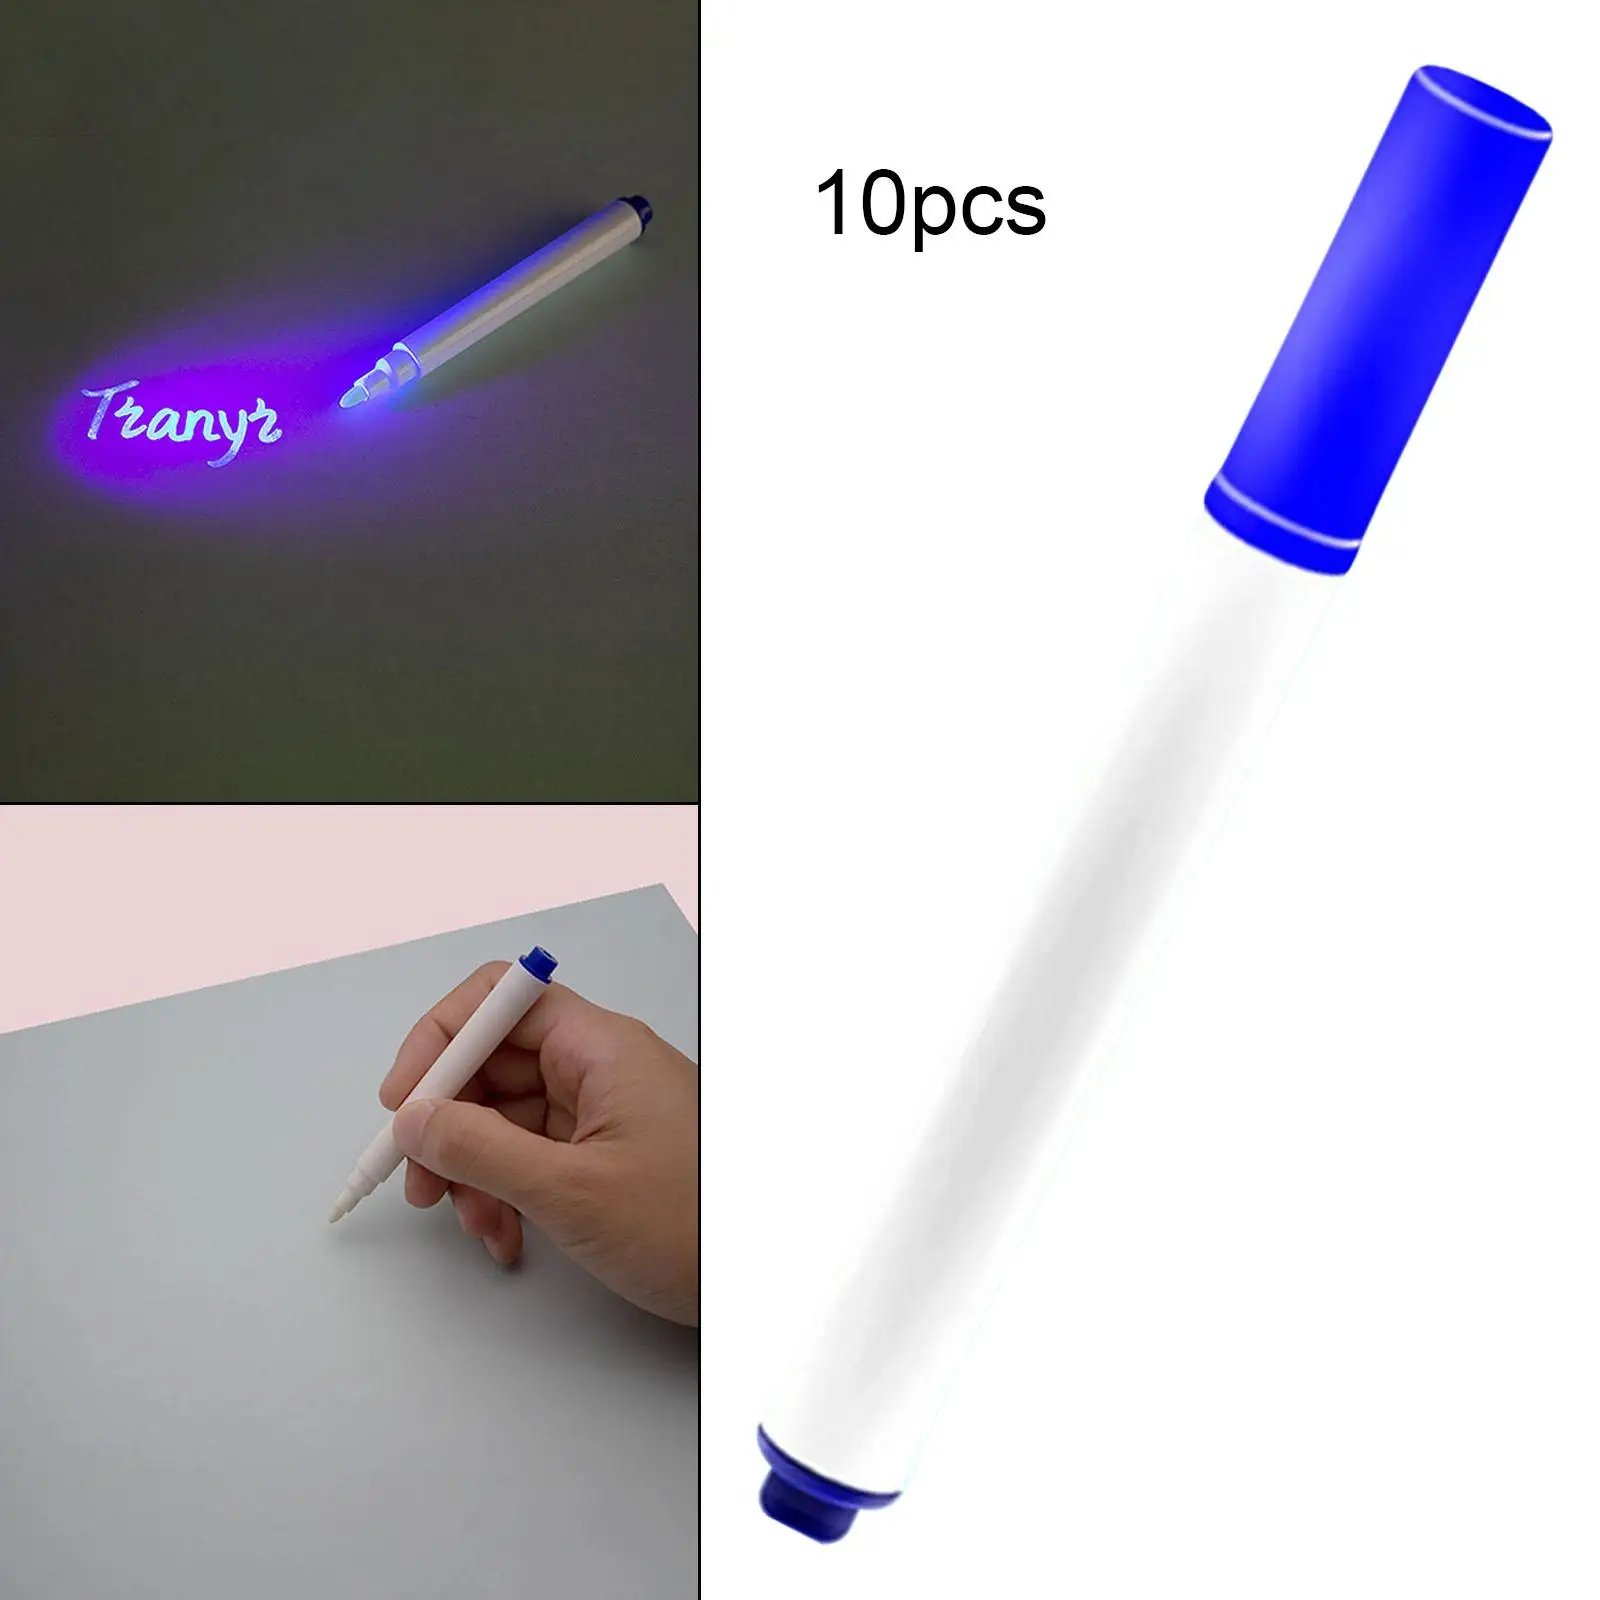 10x Invisible Ink Pen Marker Pens Writing 0.5cm Point Painting Drawing for Doodle Graffiti Birthday Party Bags Message